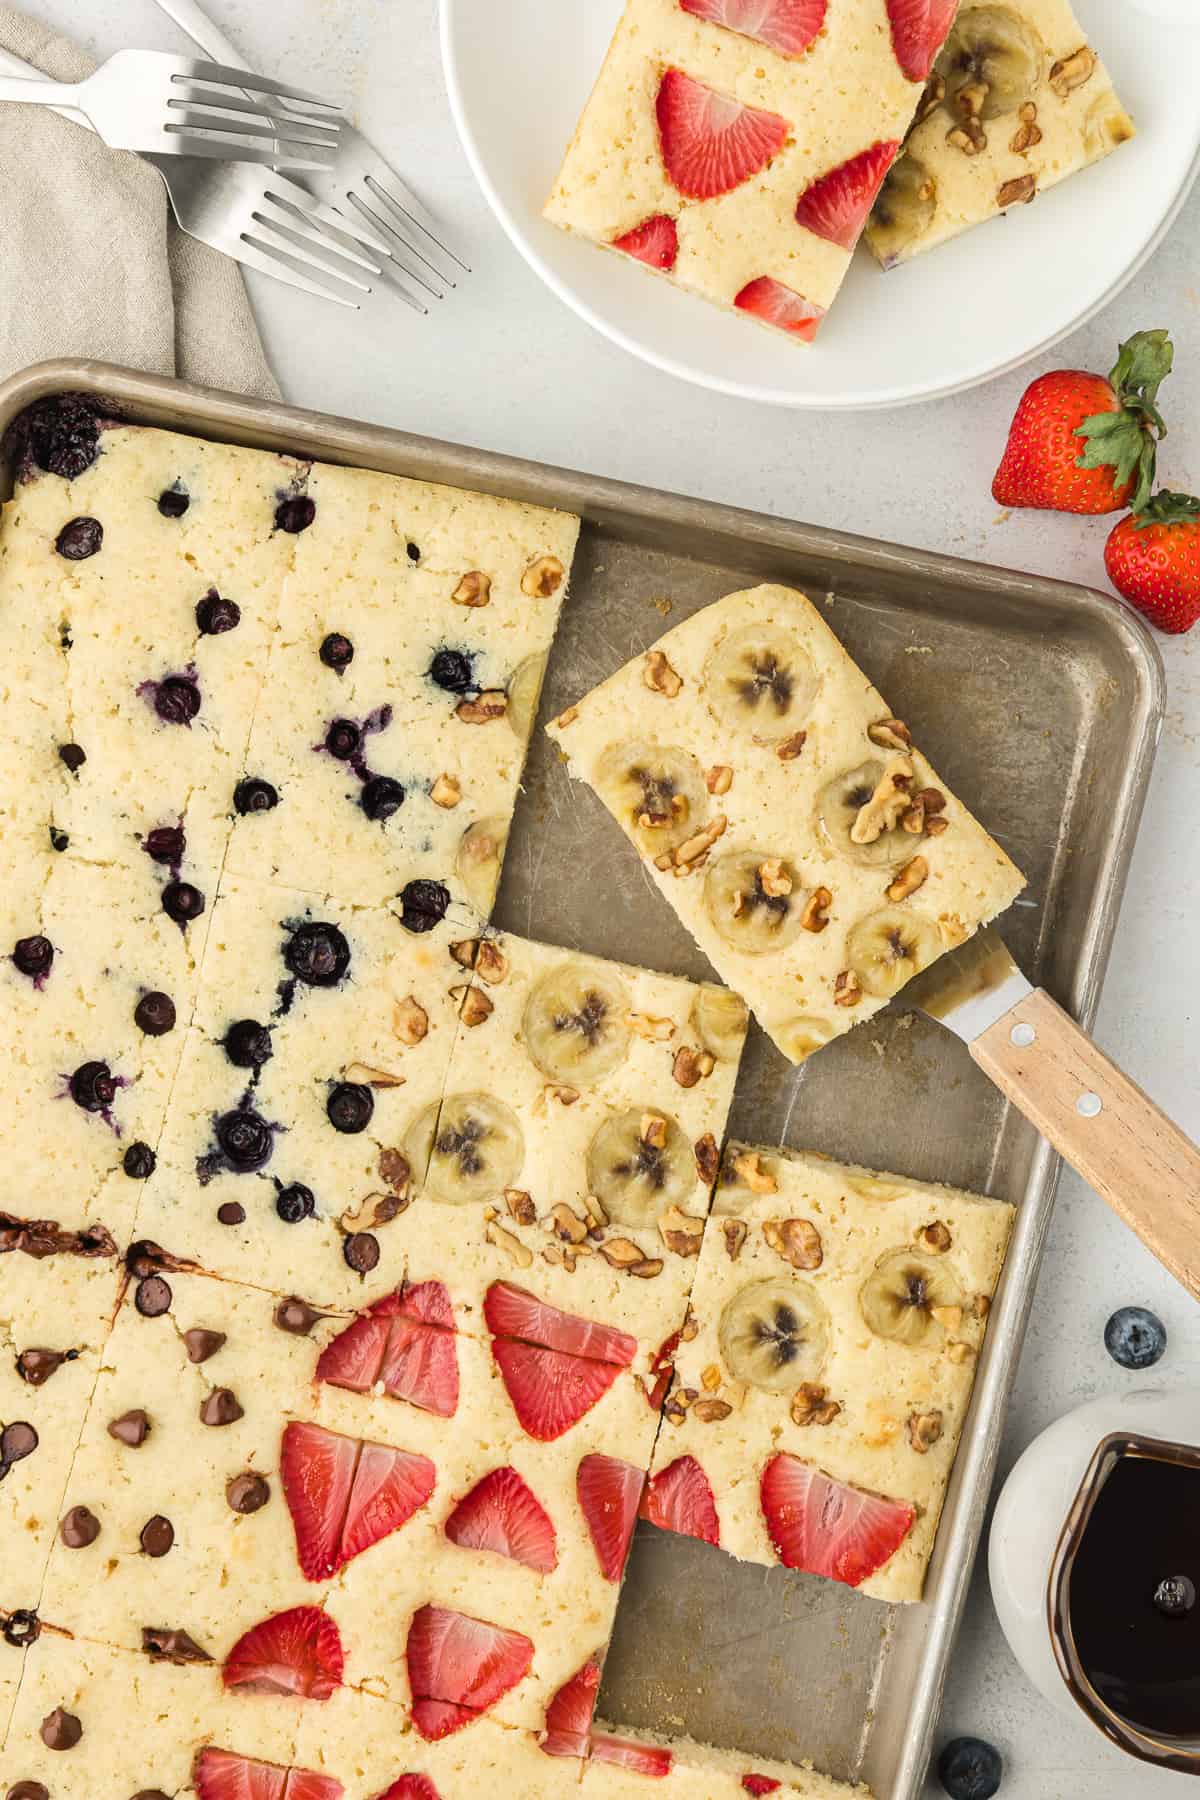 A sheet pan full of pancakes, some with blueberries in them, some with bananas and nuts, some with chocolate chips and some with strawberries, with one pancake being lifted by a spatula, syrup, fresh blueberries and strawberries, forks, naples, and a plate with two slices of pancake around the sheet pan